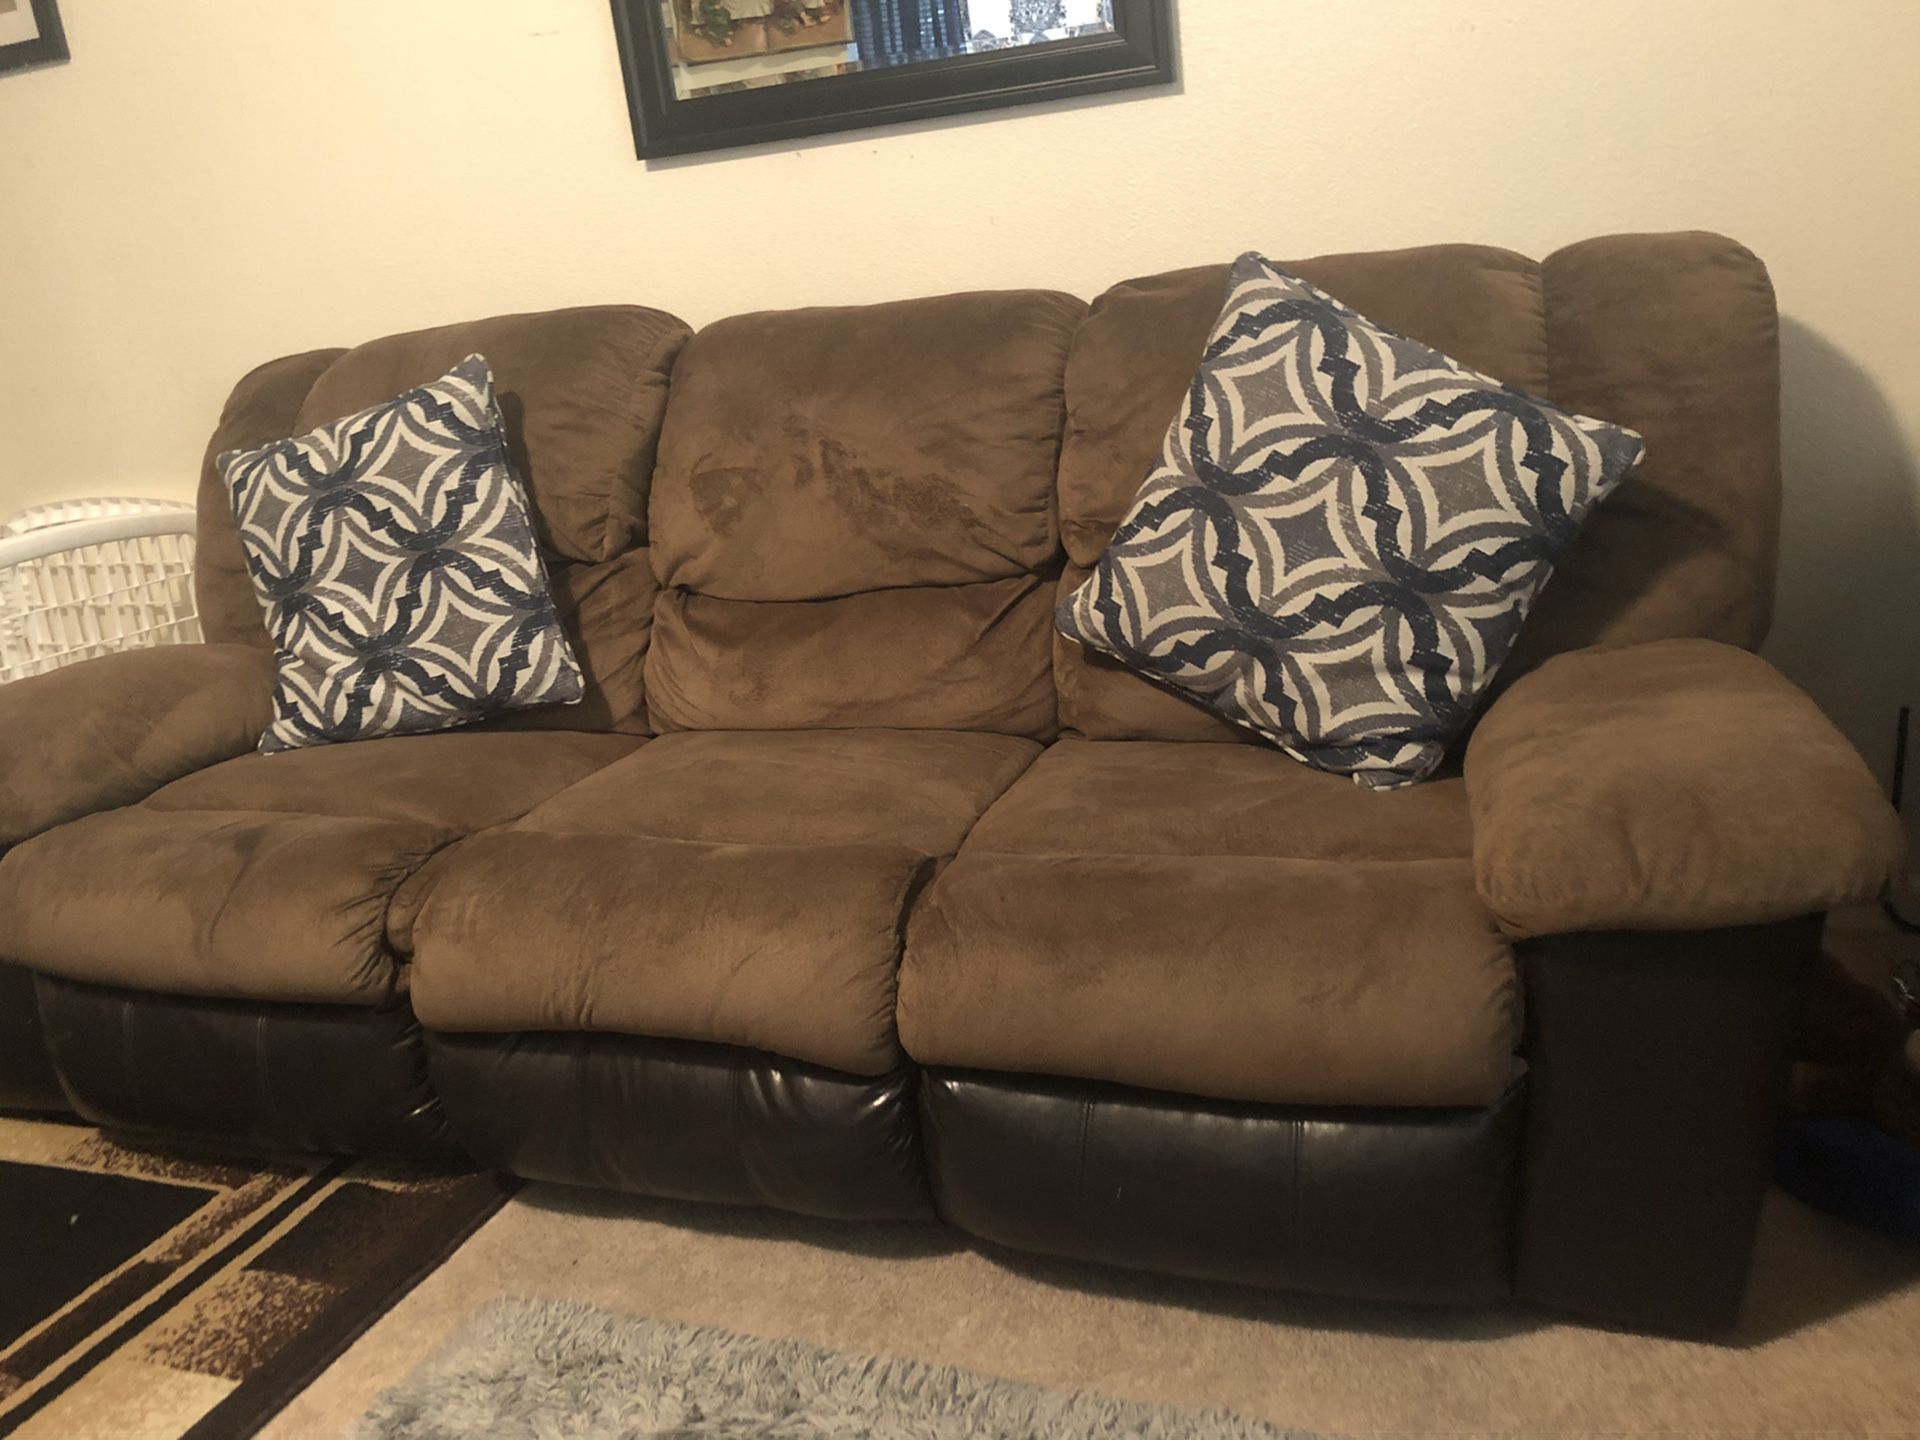 2 couches recliner.